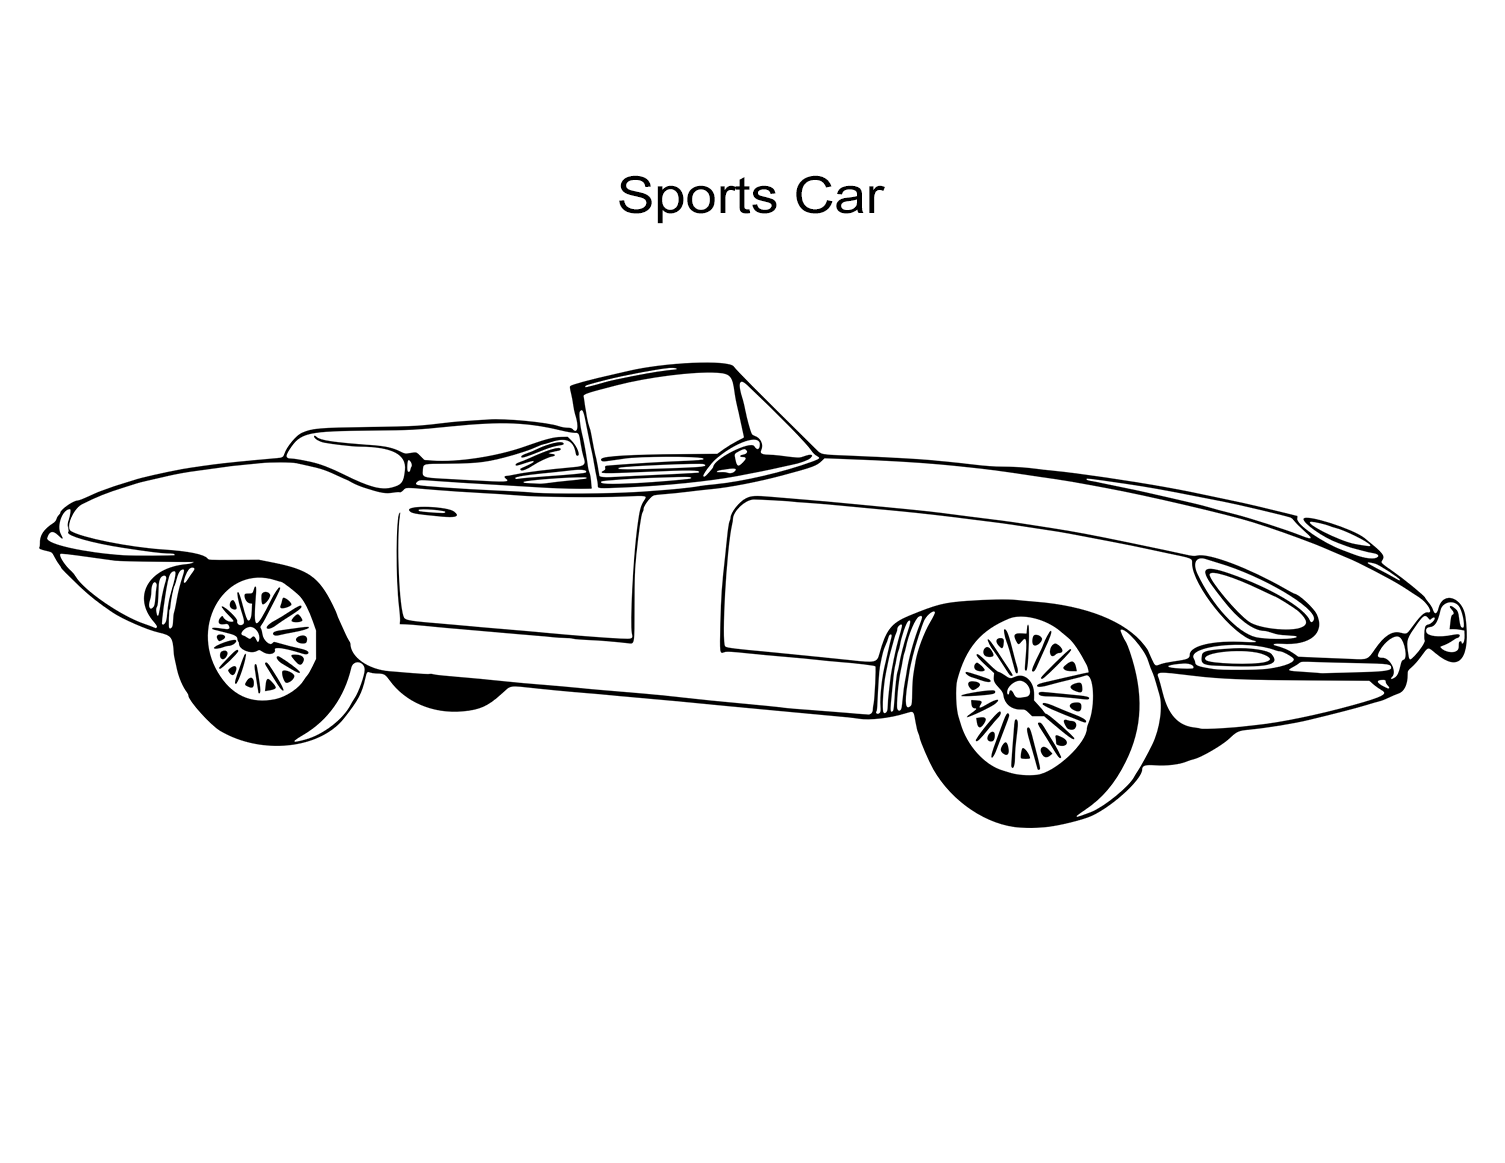 Car coloring sheets sports muscle racing cars and more